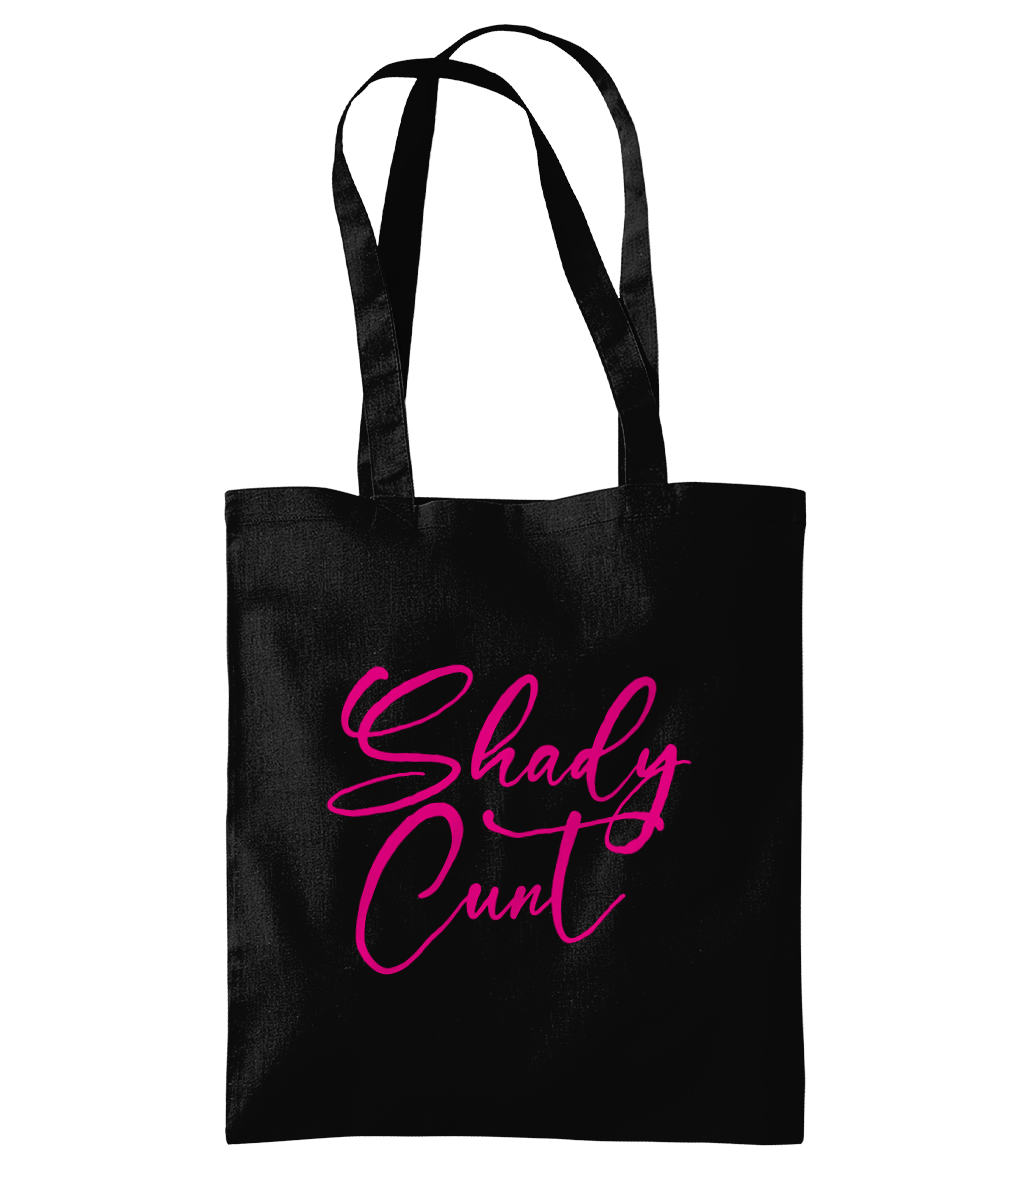 Snatched - Shady Cunt Tote Bag